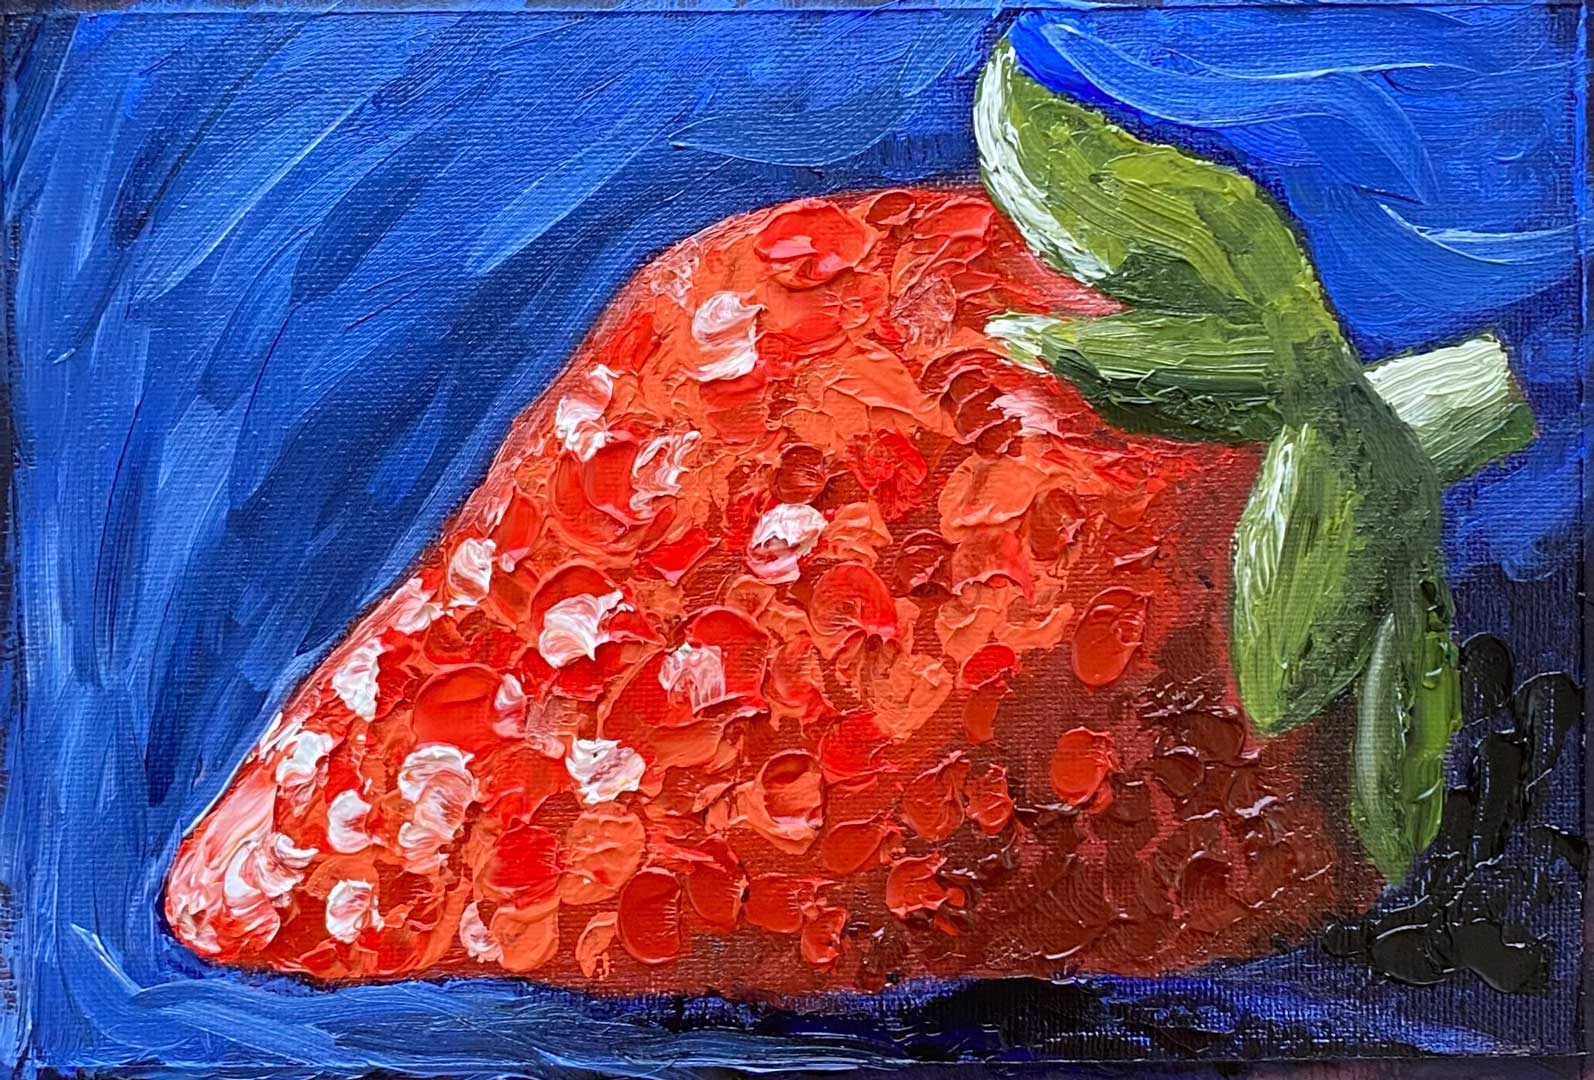 A single strawberry, painted using thick spots of reds, oranges, pinks, and white